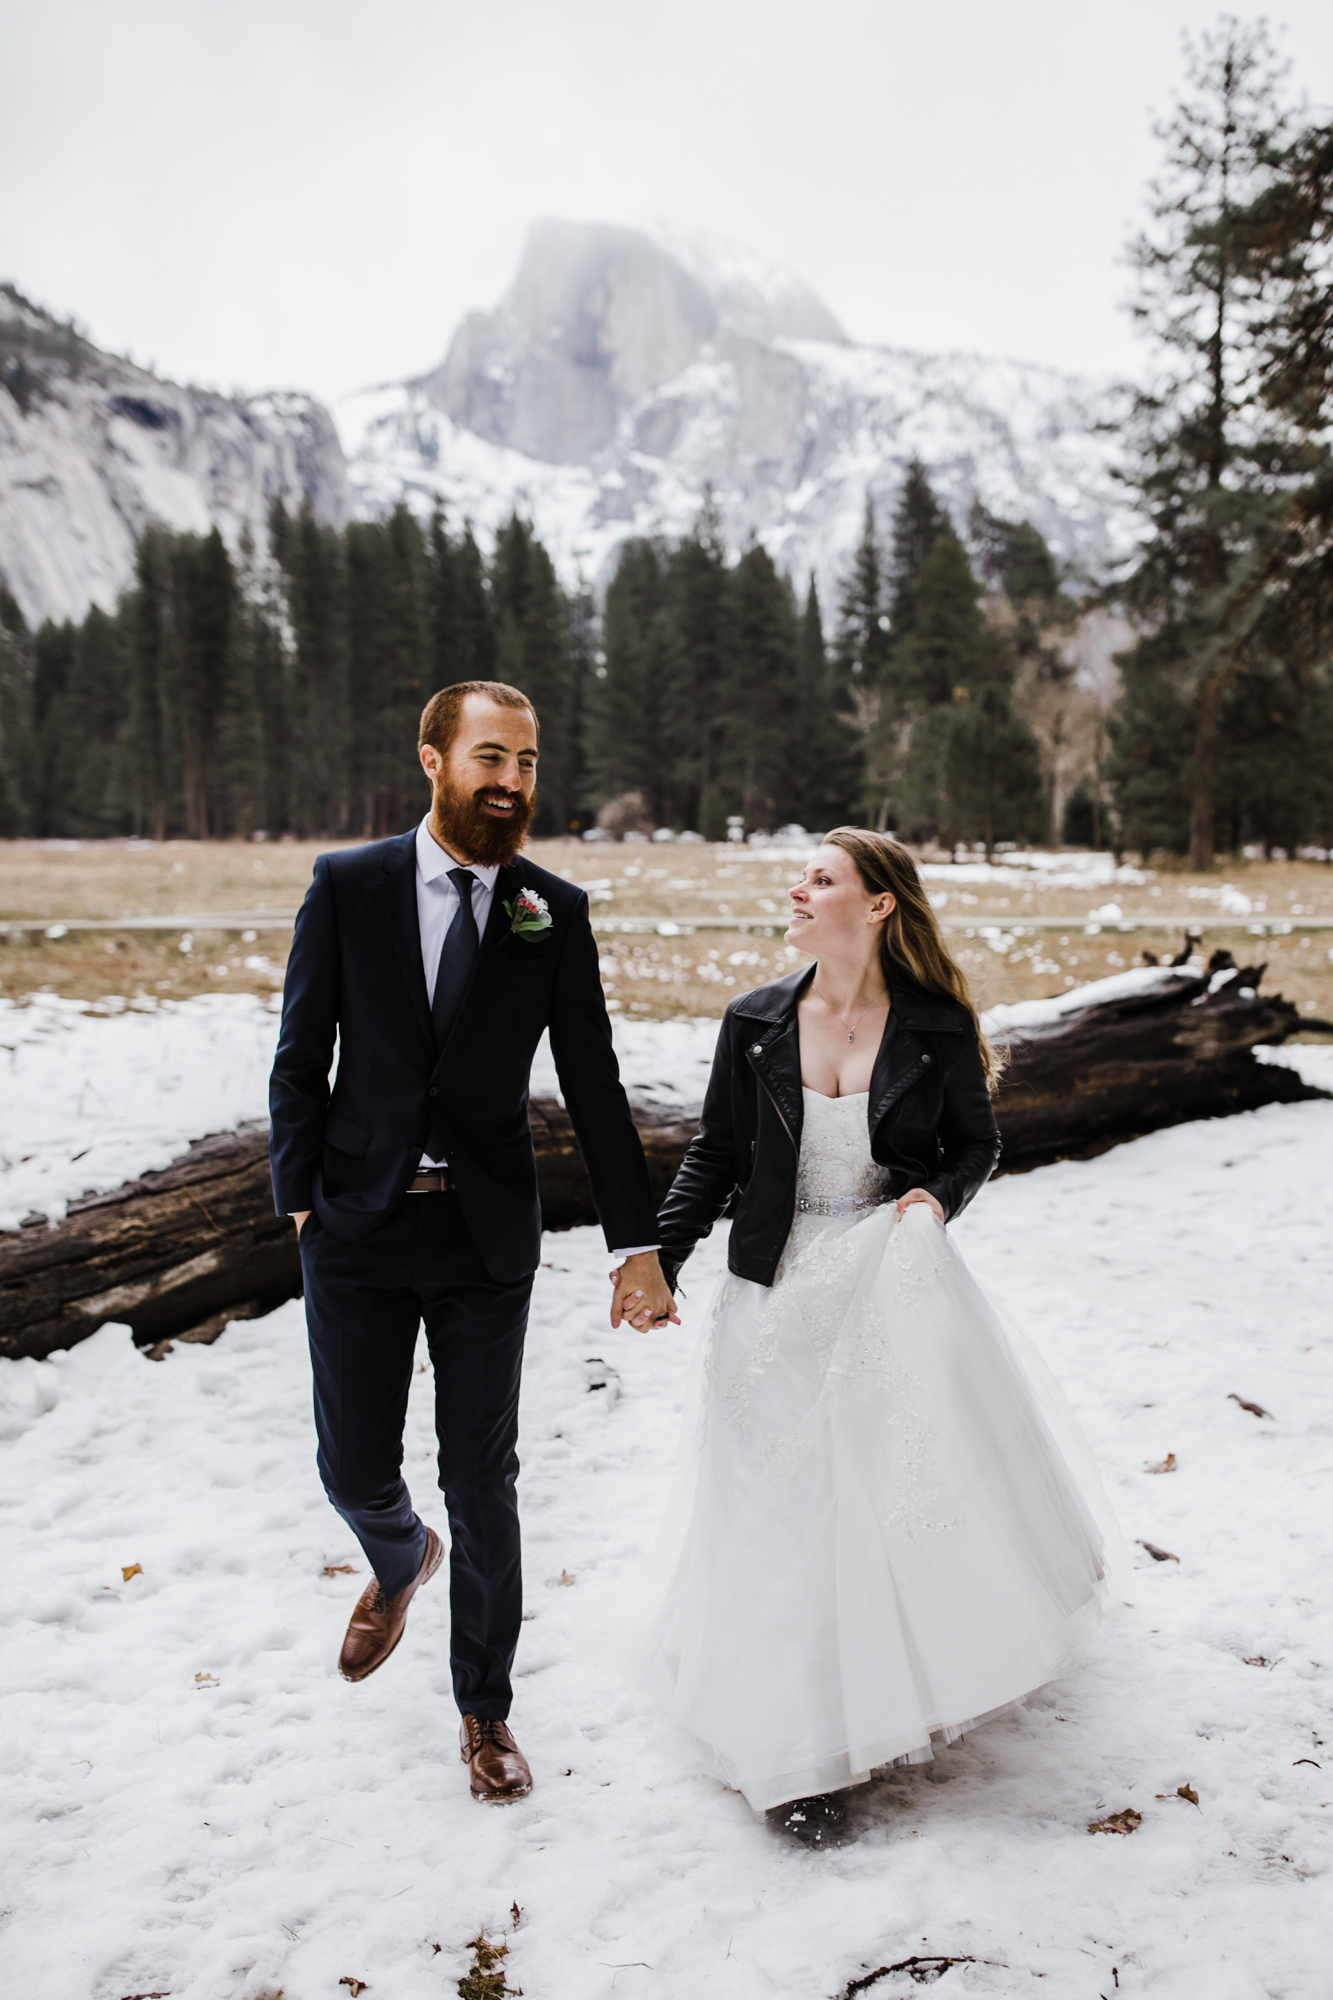 snowy elopement wedding ceremony in yosemite national park | The Hearnes Adventure Photography